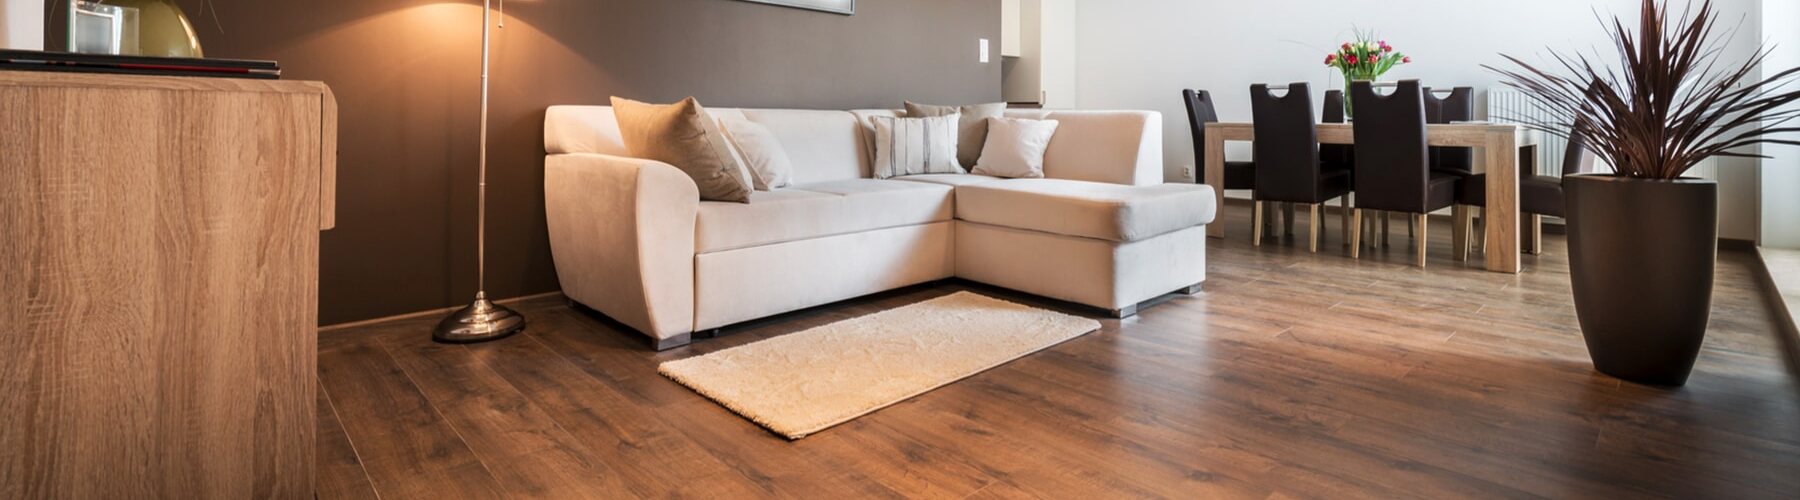 Flooring made fast, easy & affordable with Easton Flooring Co on WILLOW GROVE, PA area